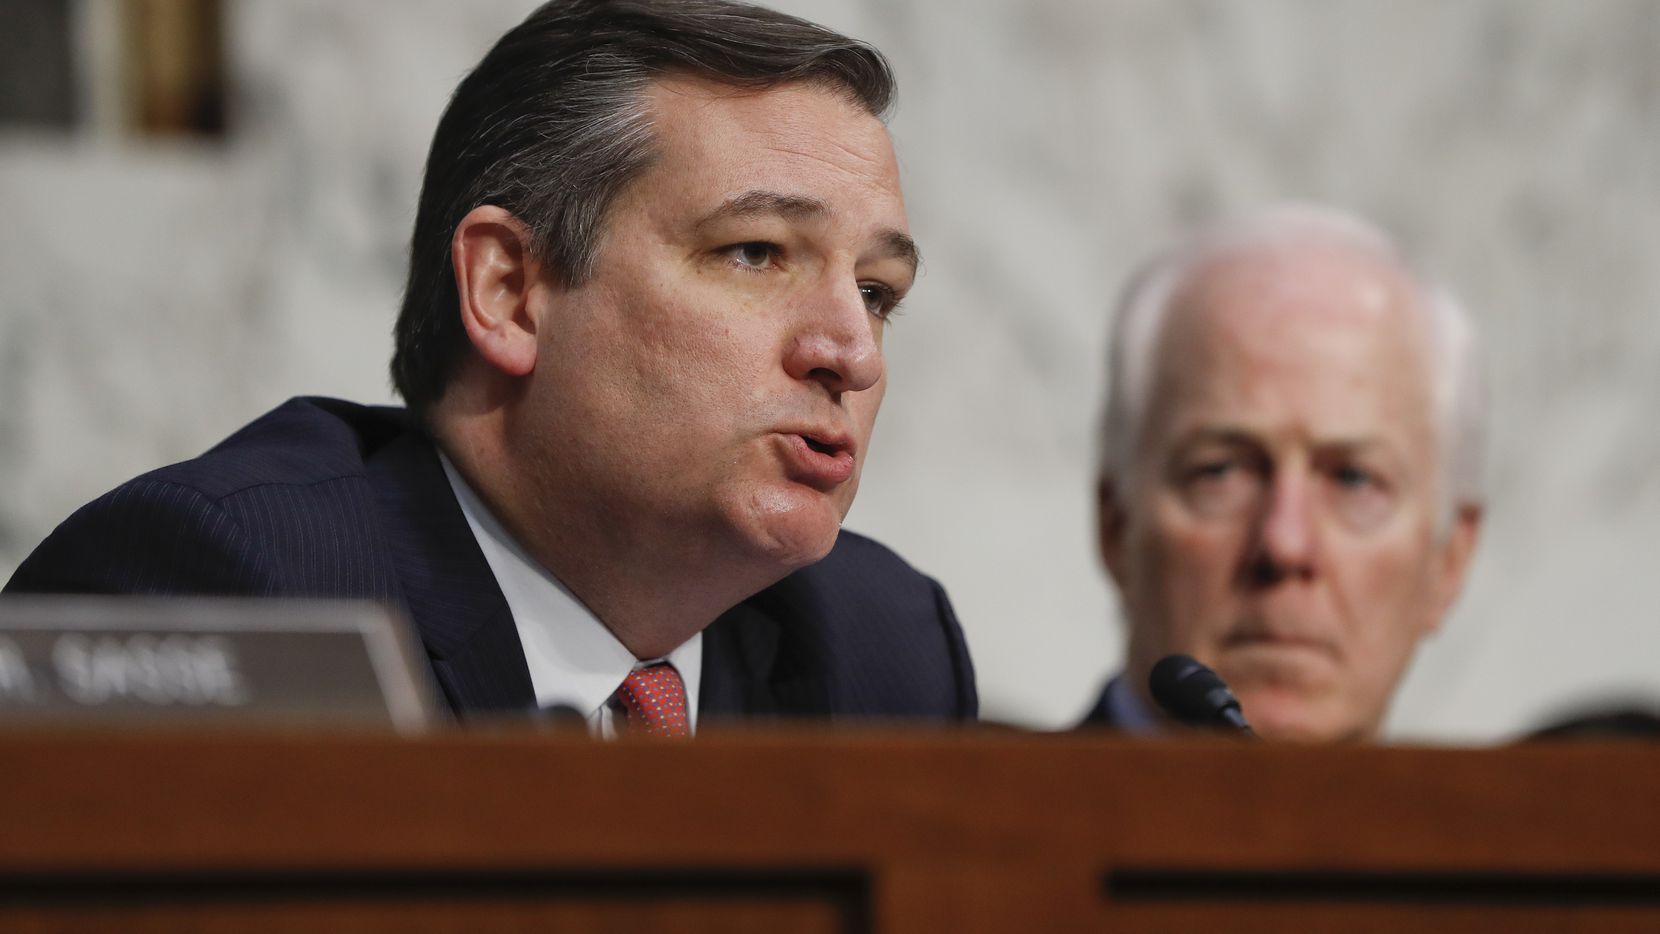 Sen. Ted Cruz (left), R-Texas, questions former Acting Attorney General Sally Yates and former National Intelligence Director James Clapper as Sen. John Cornyn, R-Texas, looks on during during testimony on Capitol Hill in Washington in 2017 before the Senate Judiciary subcommittee on Crime and Terrorism hearing: "Russian Interference in the 2016 United States Election."